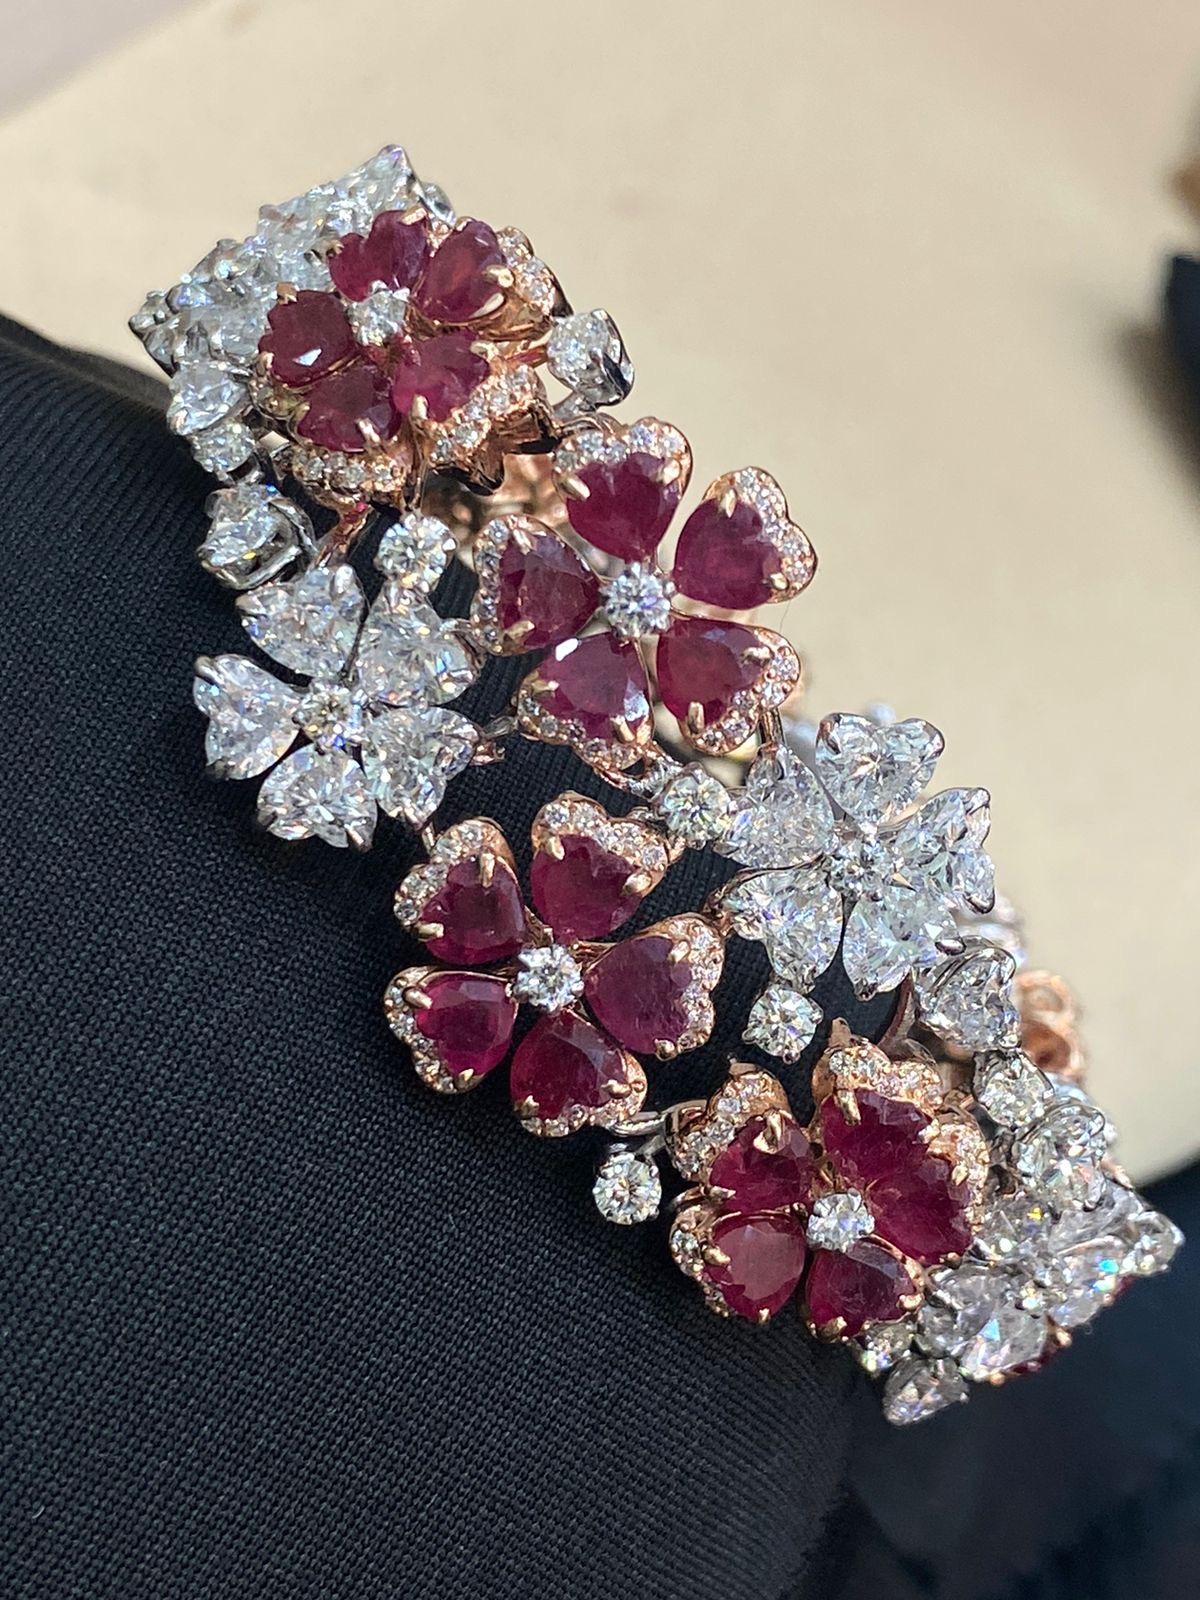 Gorgeous 31.38 Cts Heart Round Shape Diamonds Real Ruby Tennis Bracelet 14K Gold In New Condition For Sale In Massafra, IT